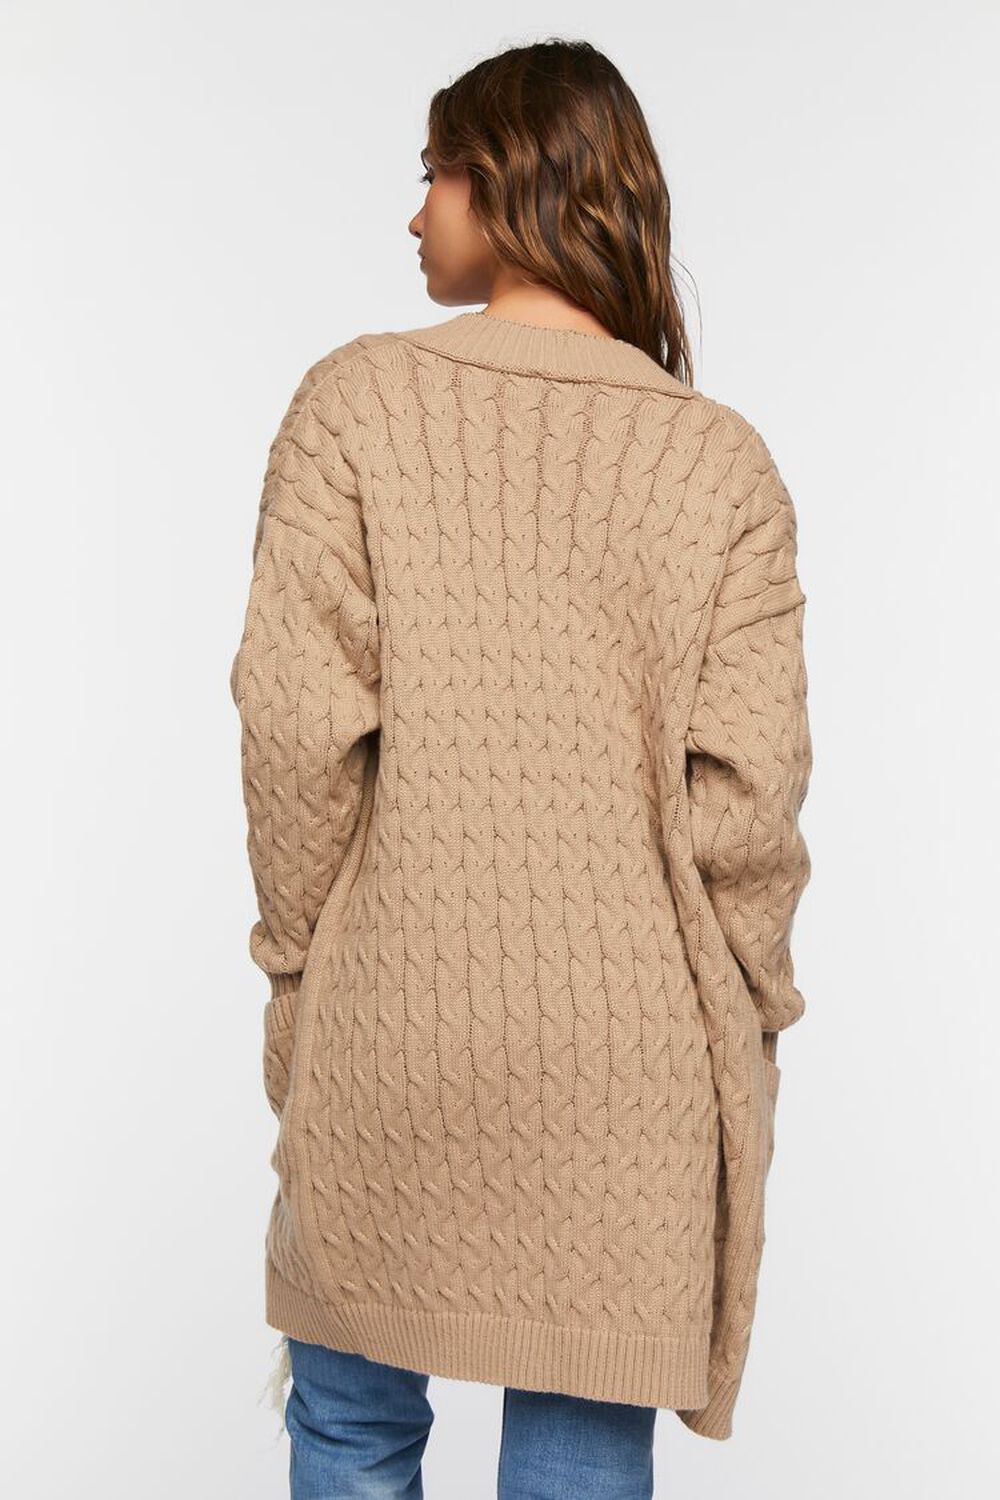 KHAKI Open-Front Cable Knit Cardigan Sweater, image 3